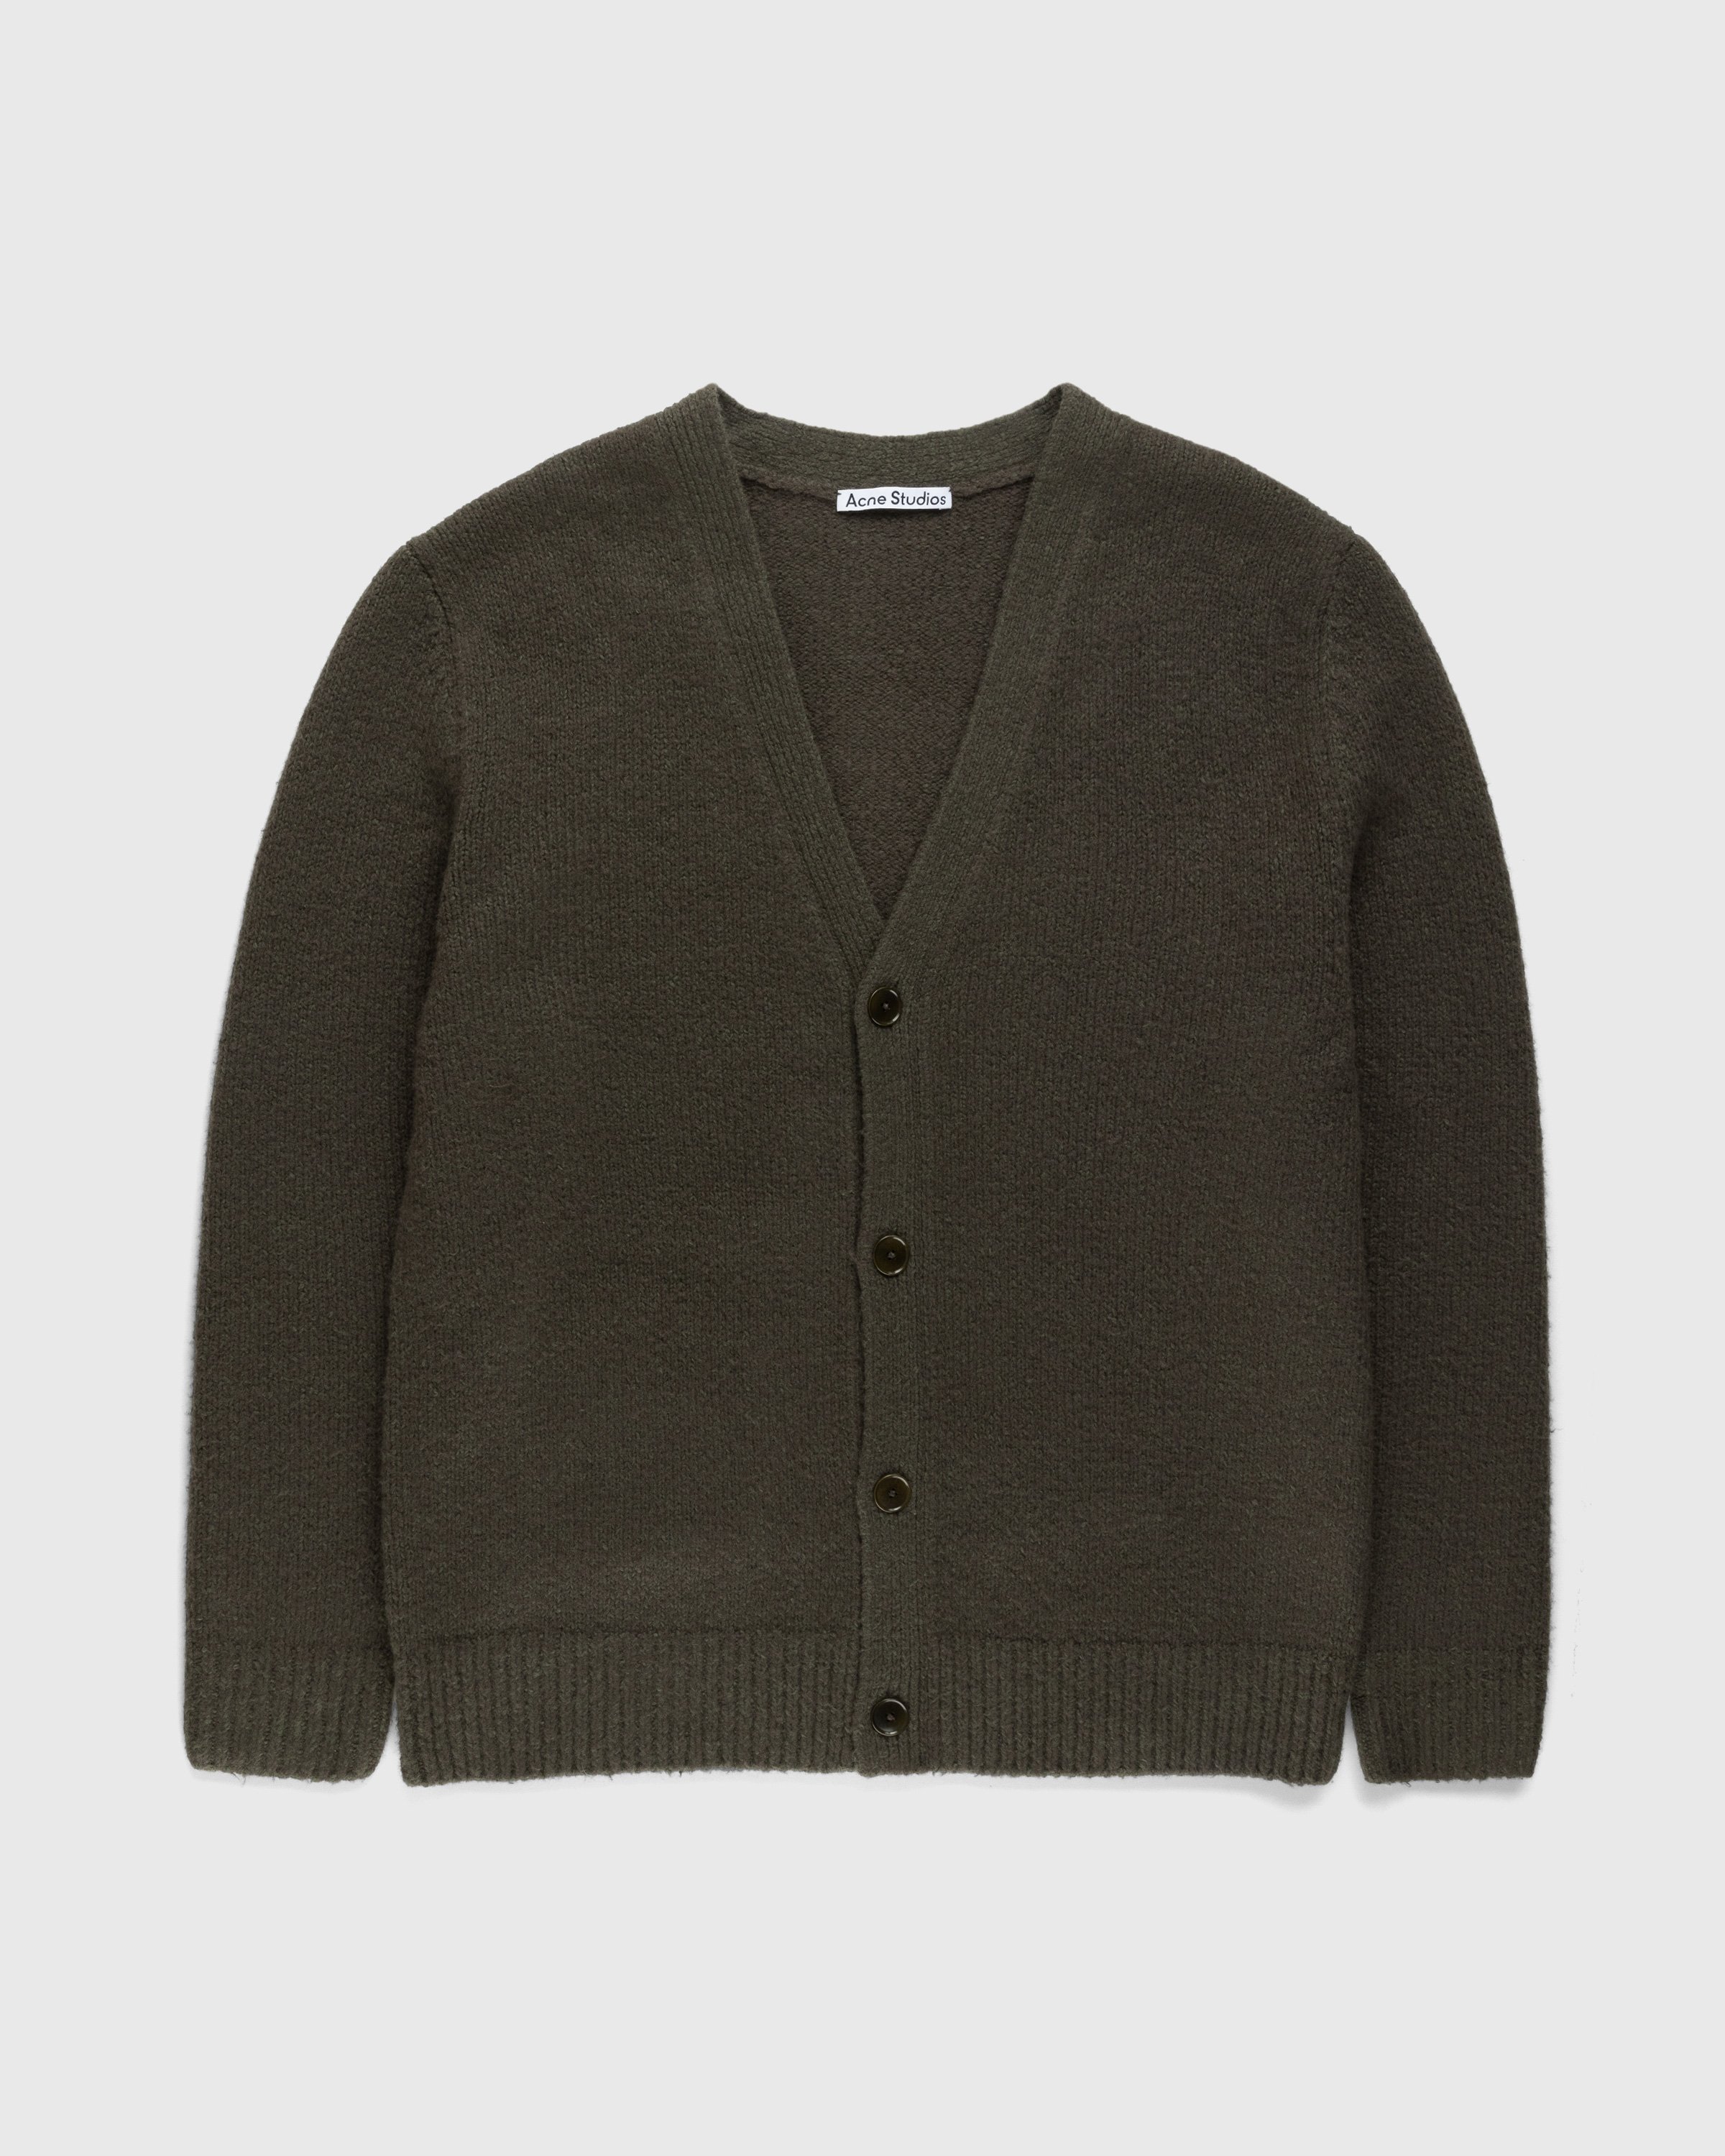 Acne Studios - Wool Blend V-Neck Cardigan Sweater Forest Green - Clothing - Grey - Image 1